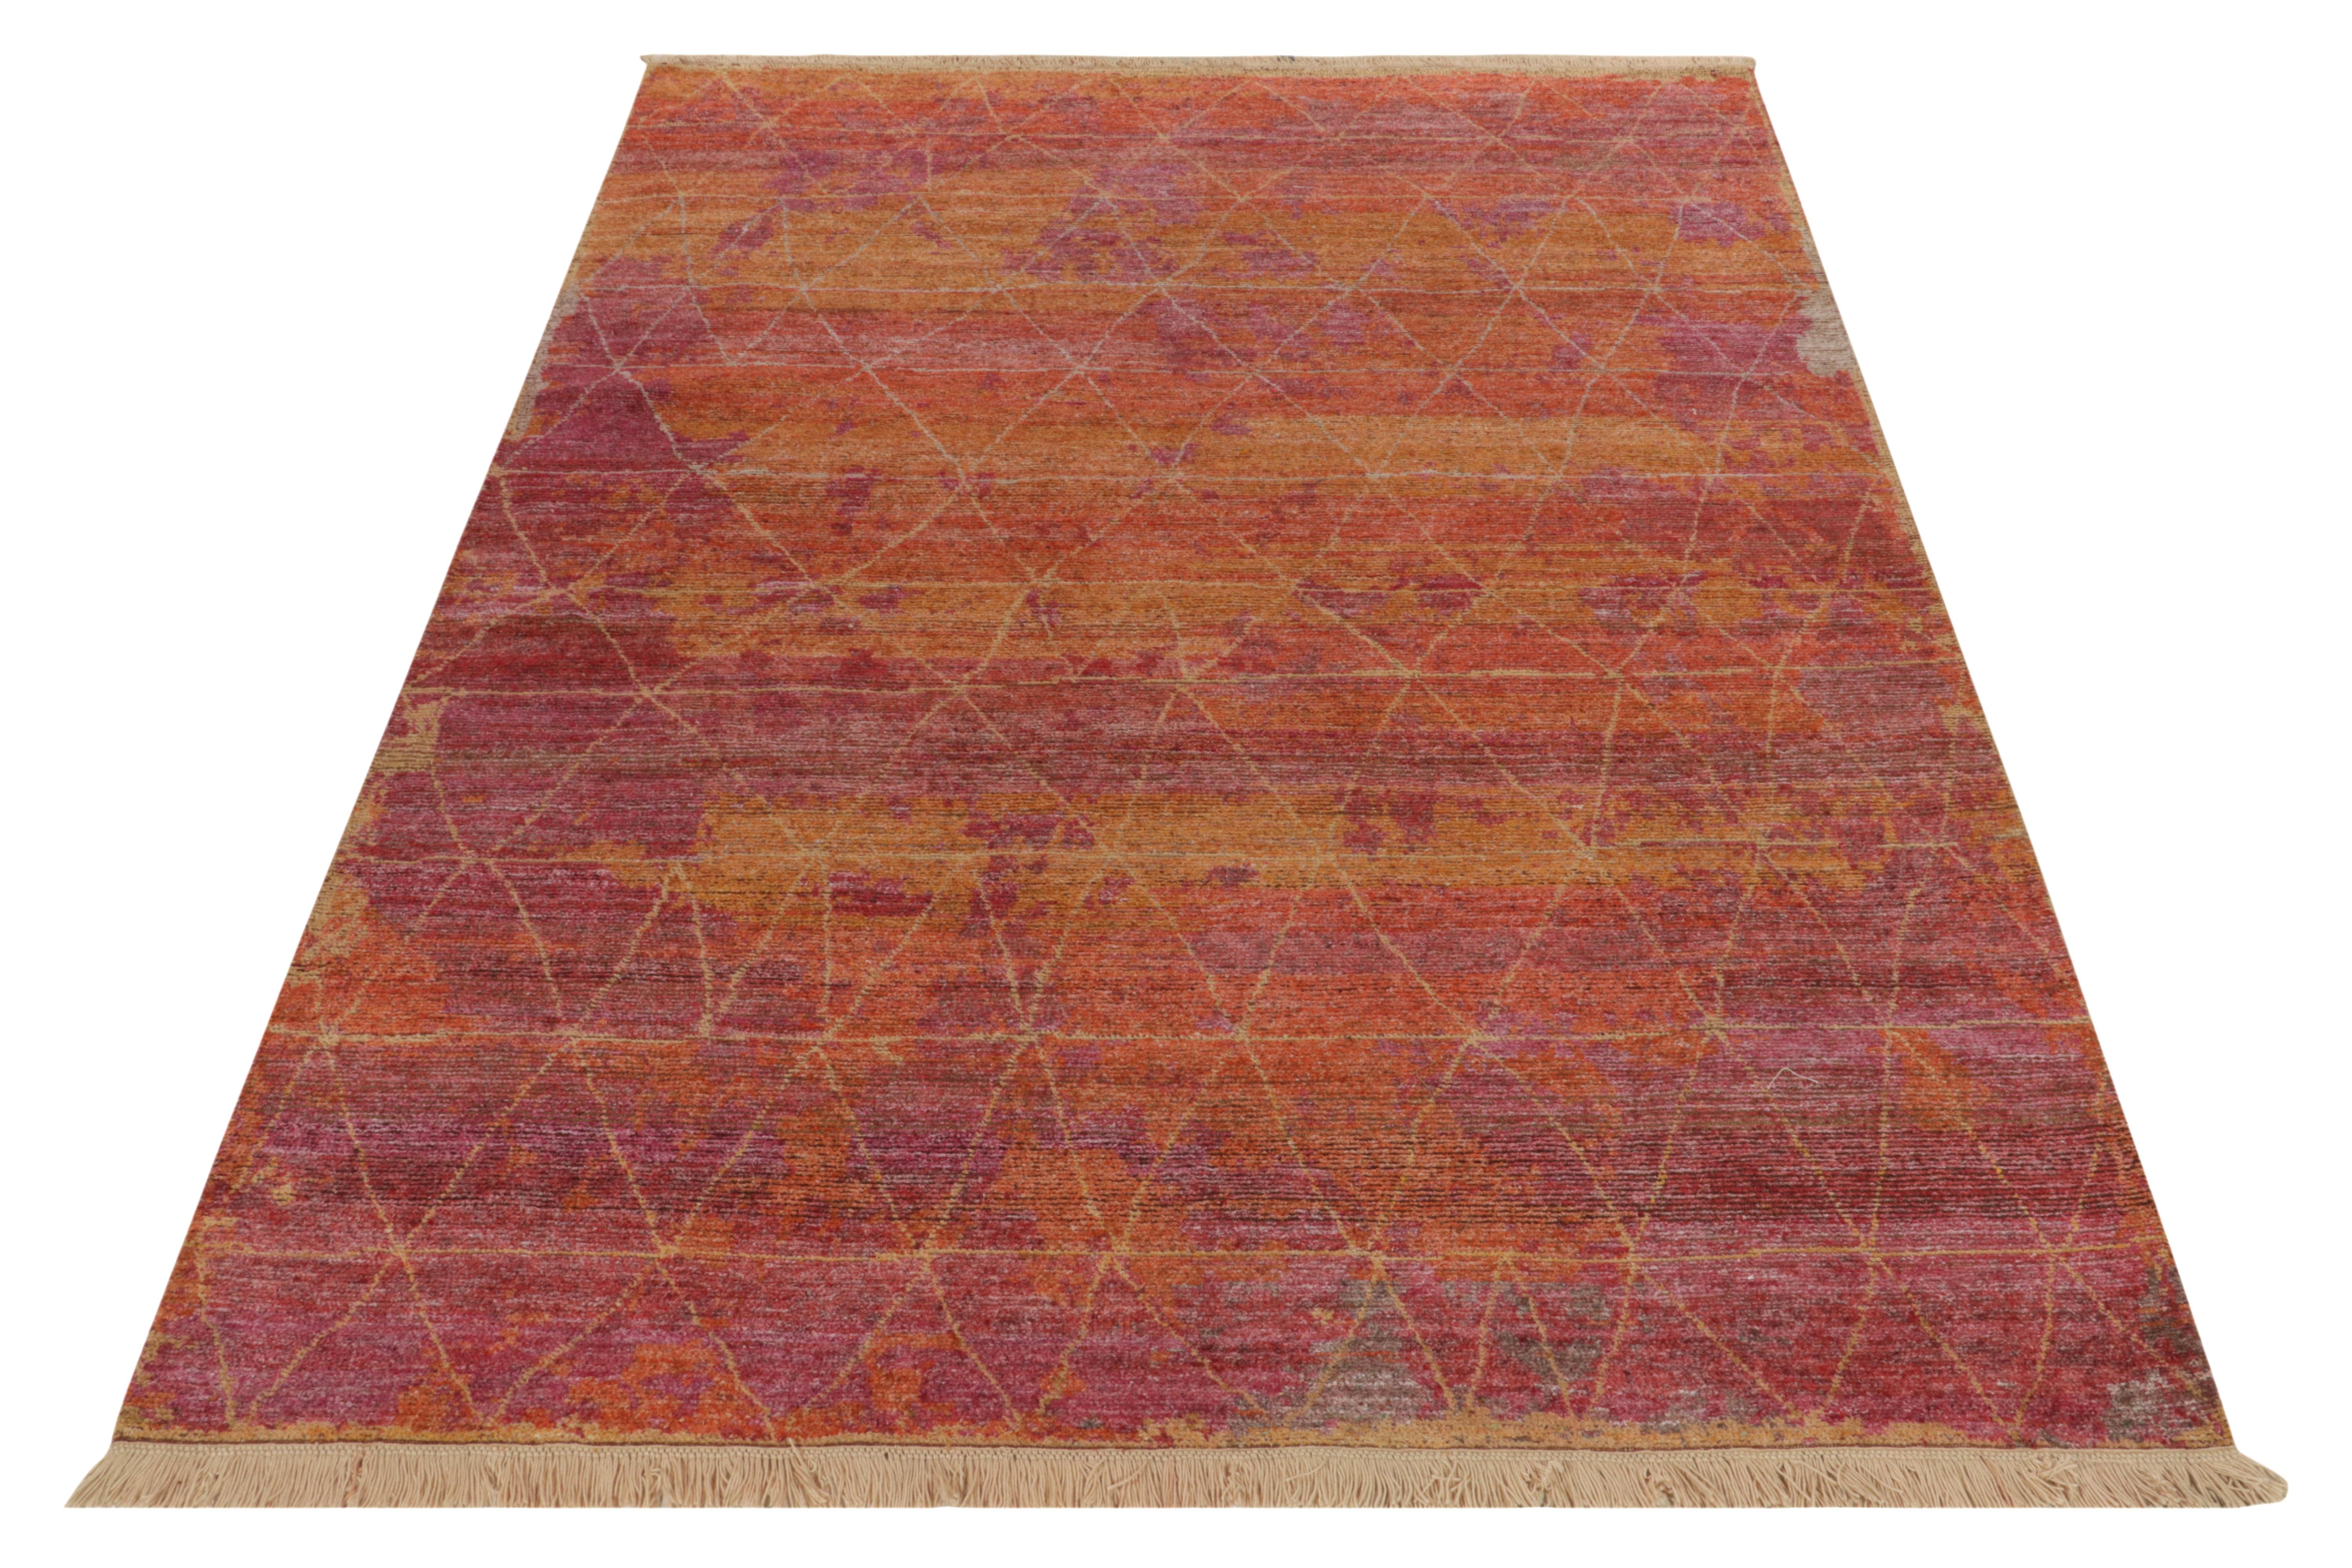 From Rug & Kilim’s bold modern selections, an 8x12 rug in luxe all silk, uniquely encapsulating our principal Josh Nazmiyal’s vision on contemporary styles subtly influenced by Moroccan tribal geometry. 

The hand-knotted rug comes from one of our